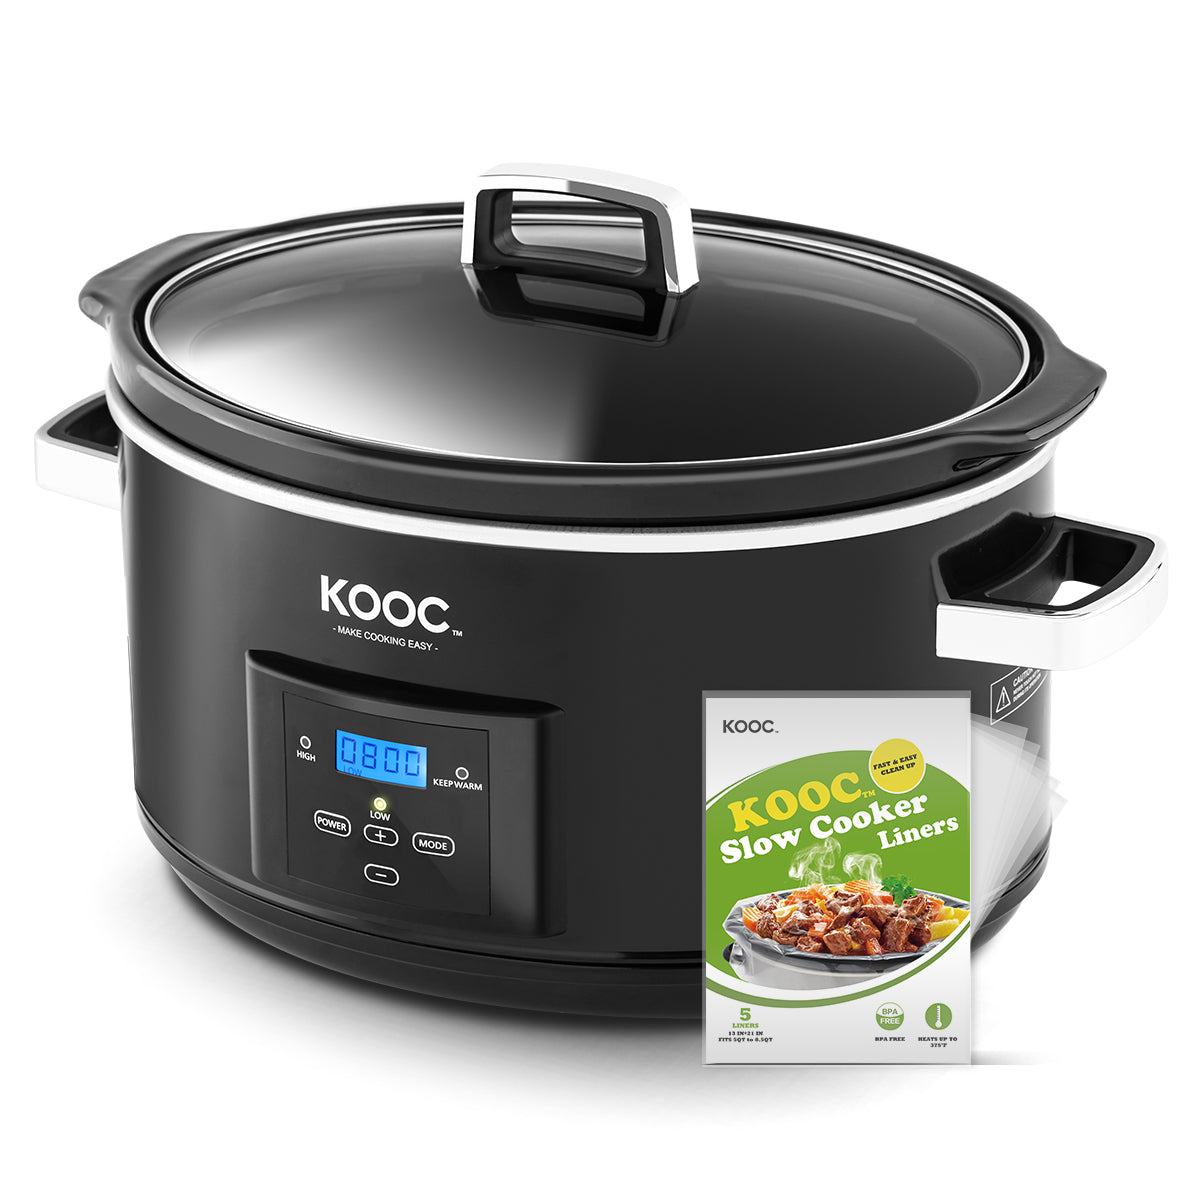 KOOC 10-in-1 Electric Dutch Oven, 6-Quart Blue, Slow Cook, Braise